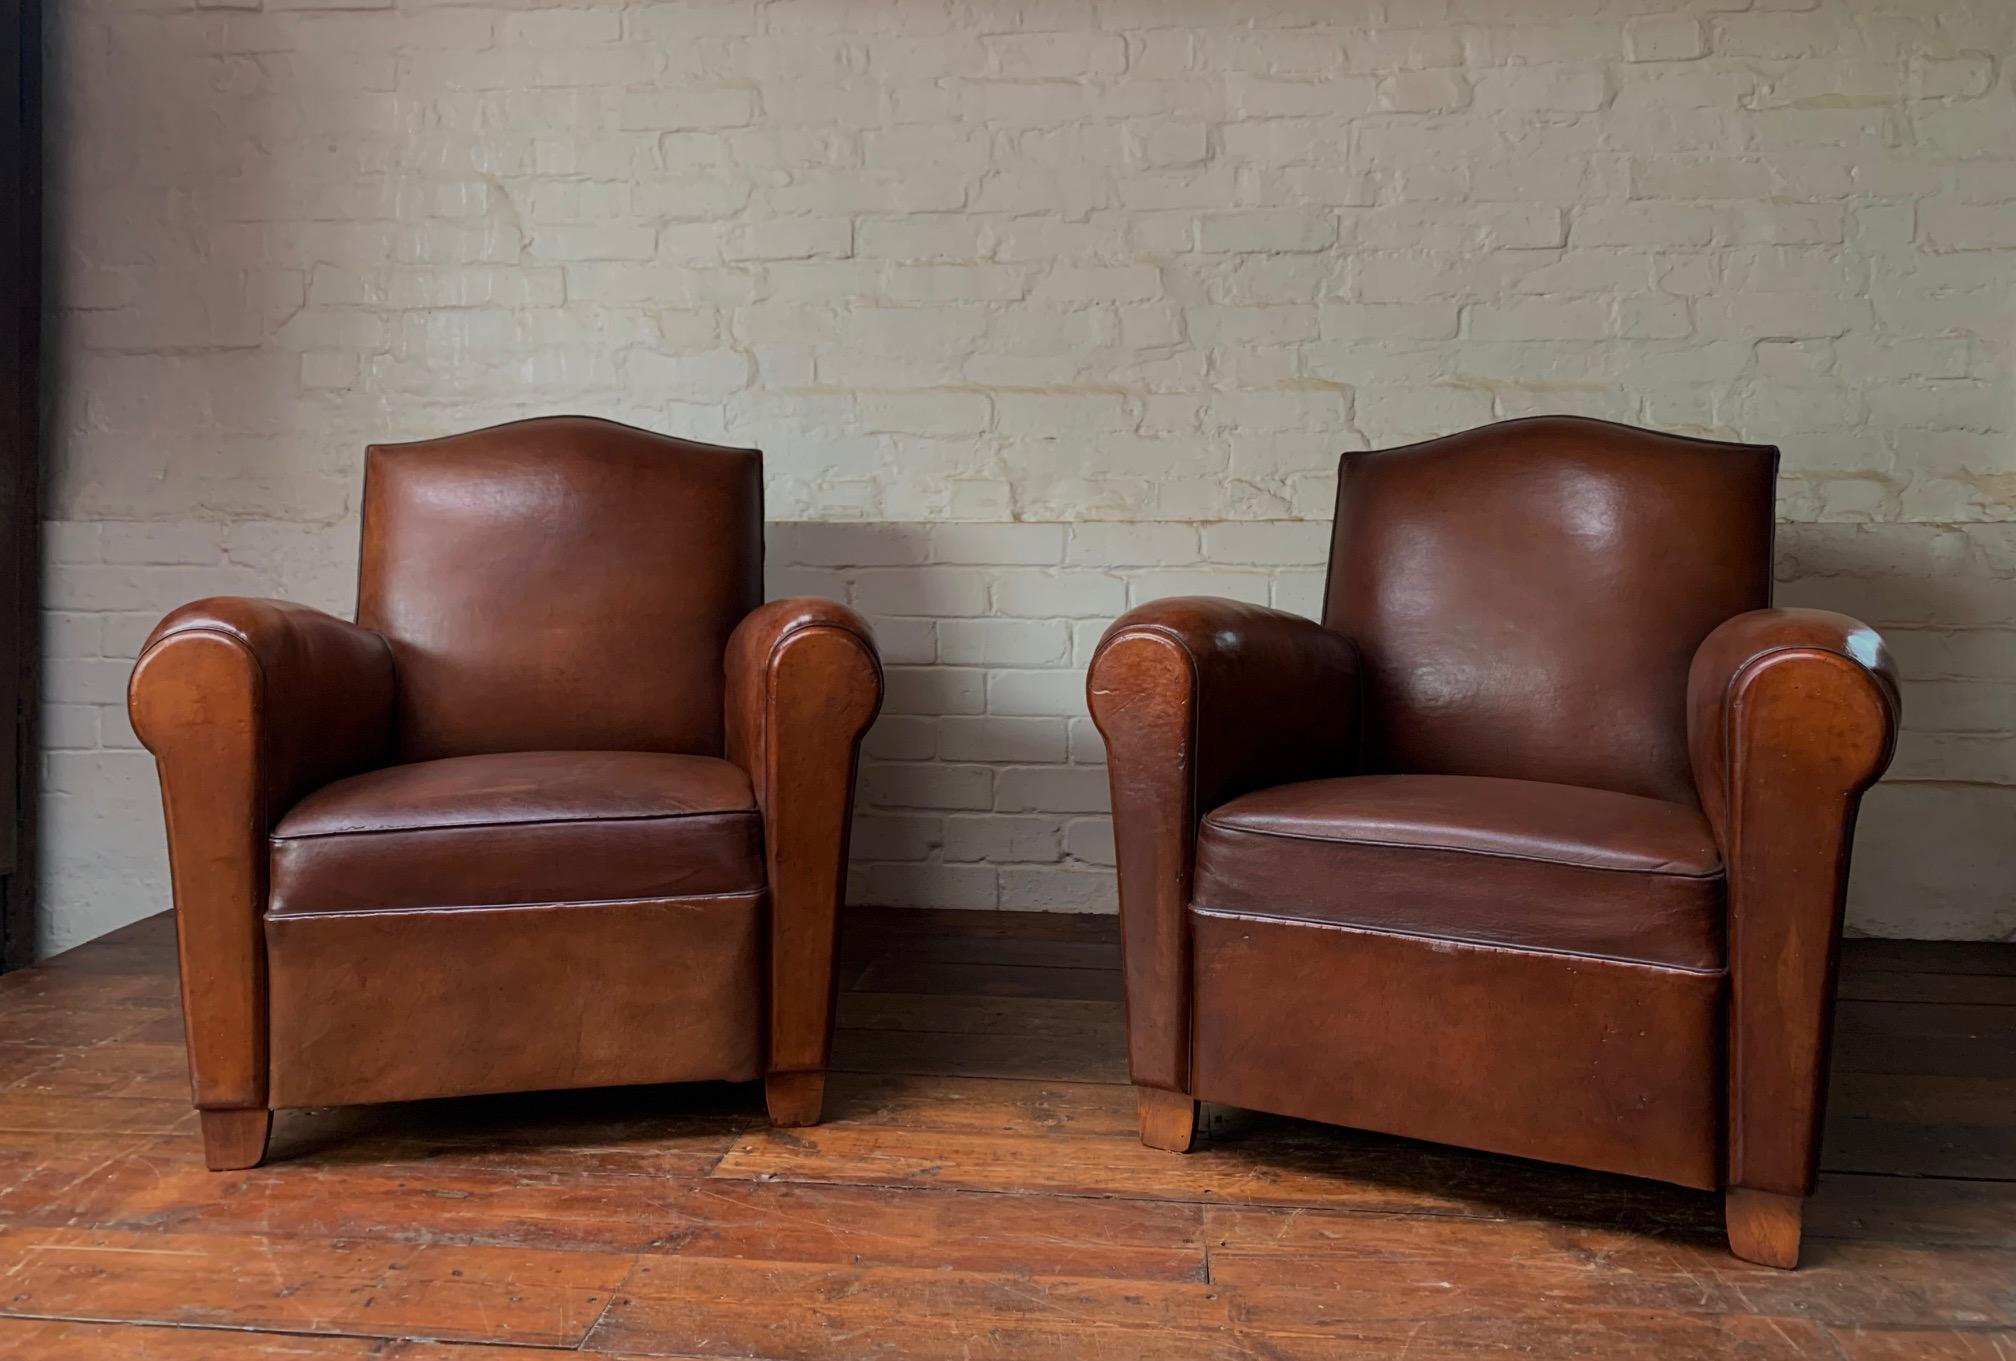 A Wonderful Pair of French Leather Club Chairs Chapeau du Gendarme Models, C1950 For Sale 5